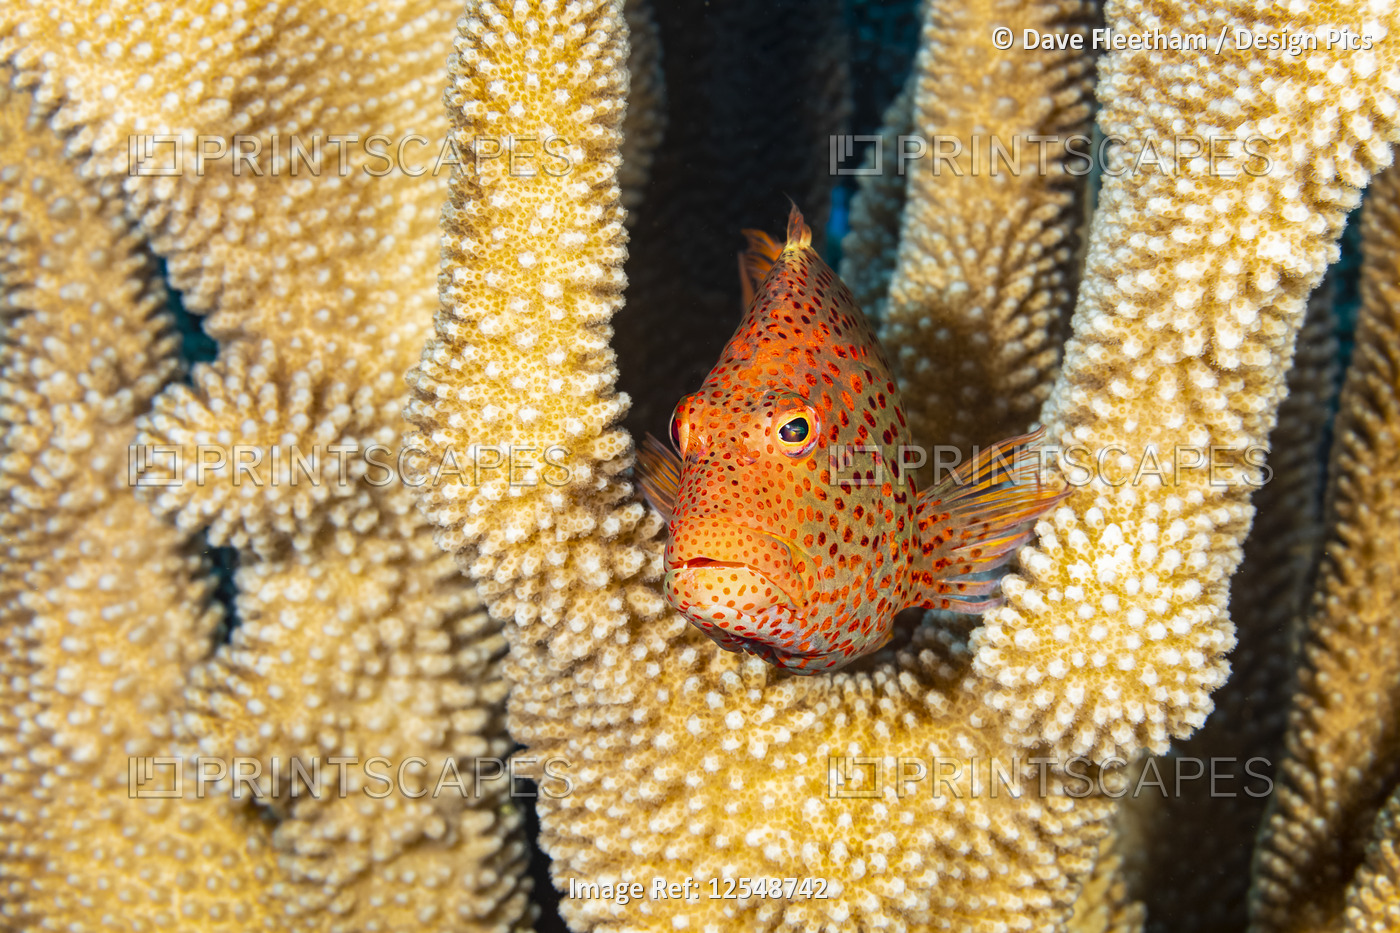 Typical of this family, the Blackside hawkfish (Paracirrhites forsteri) has ...